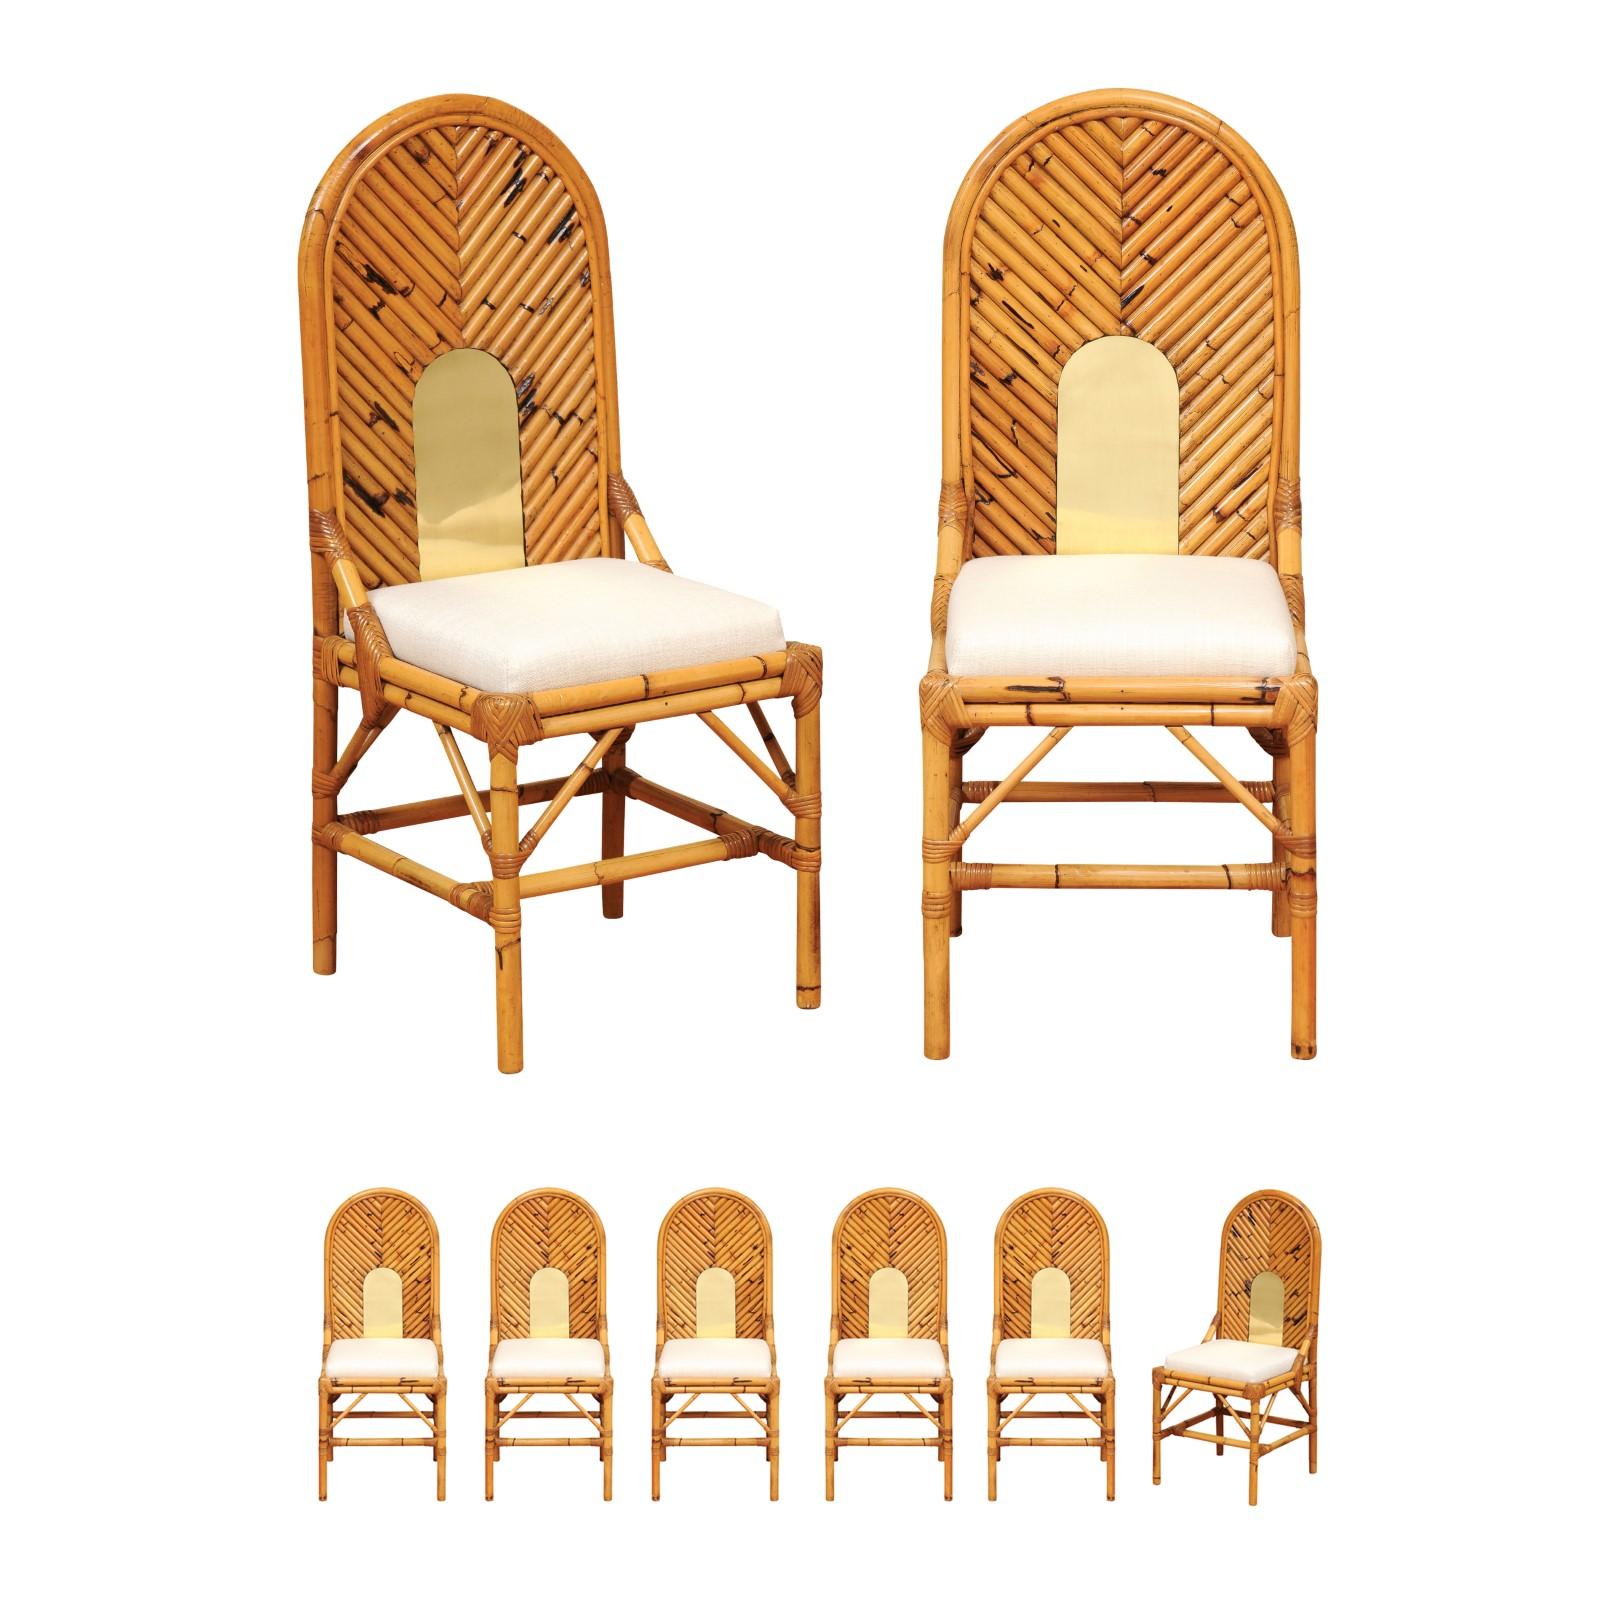 These magnificent chairs are shipped as professionally photographed and described in the listing narrative: Completely Install Ready. Meticulously professionally restored with NEW expert custom upholstery. Expert custom upholstery service is